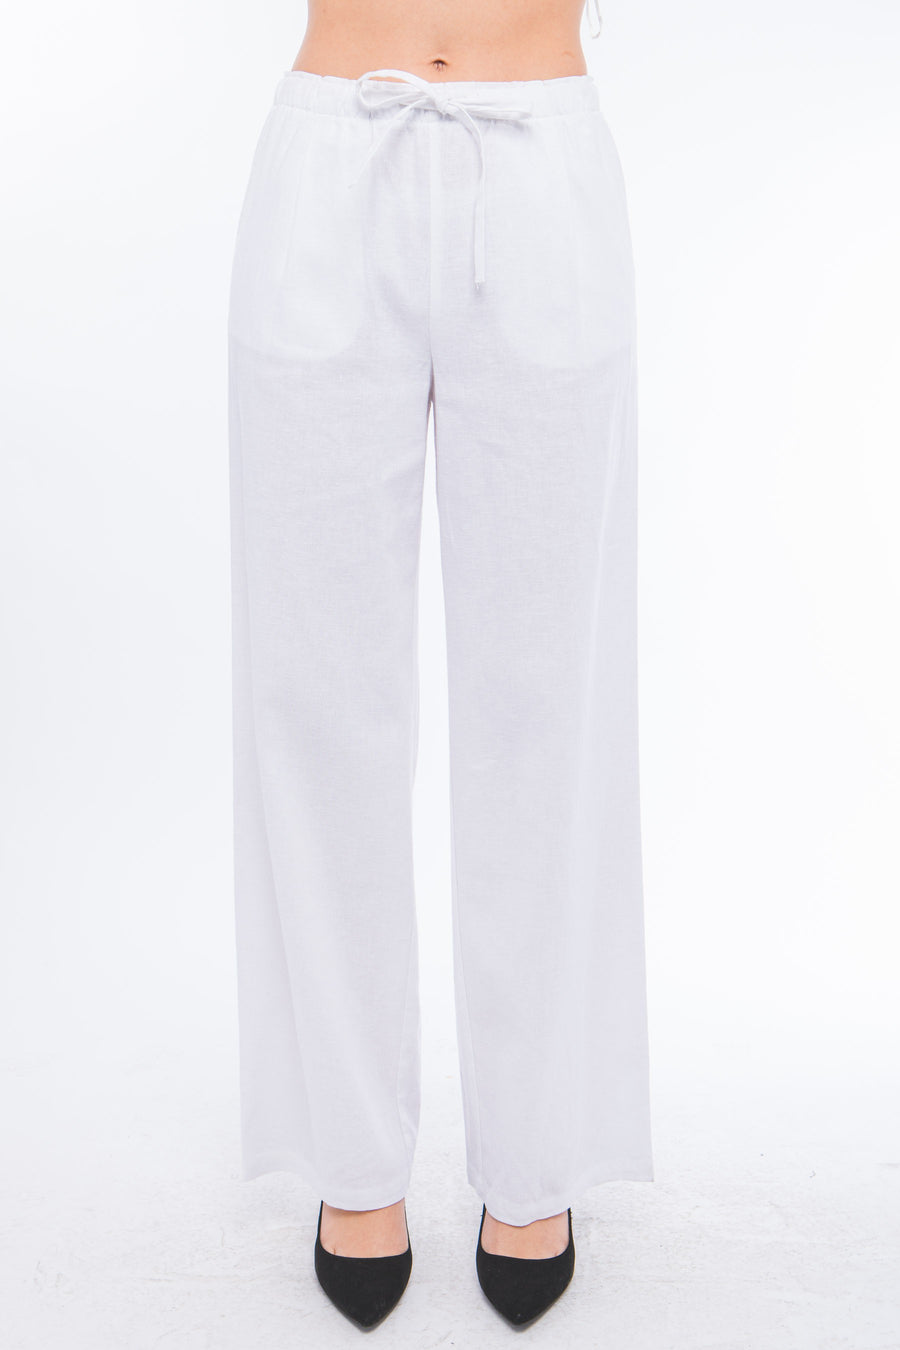 Featuring a wide leg draw string pant with pockets in the color white 